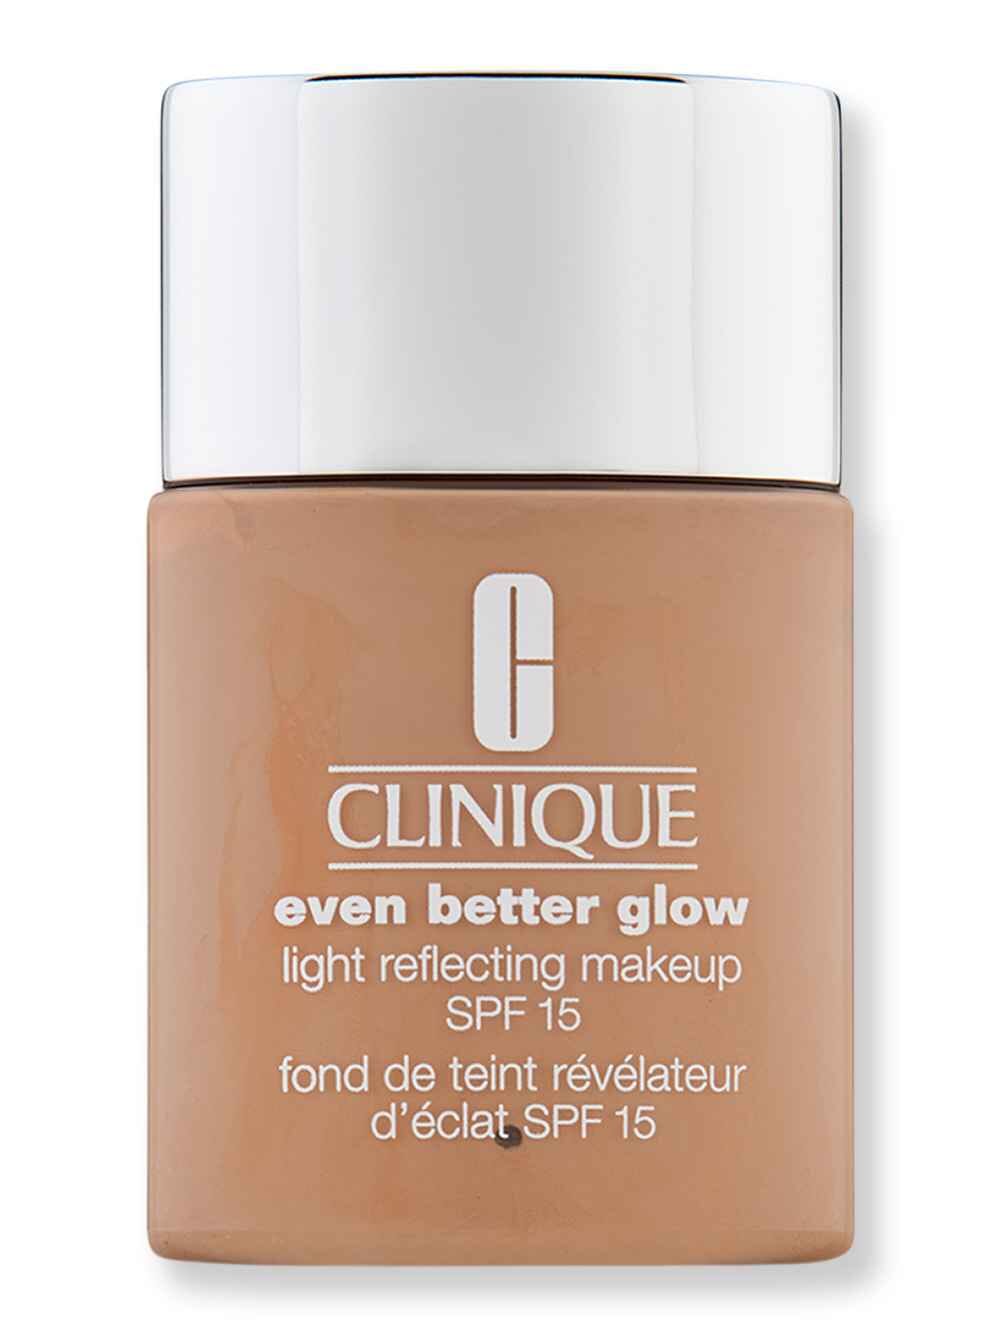 Clinique Clinique Even Better Glow Light Reflecting Makeup Broad Spectrum SPF 15 30 mlCN 52 Neutral Tinted Moisturizers & Foundations 